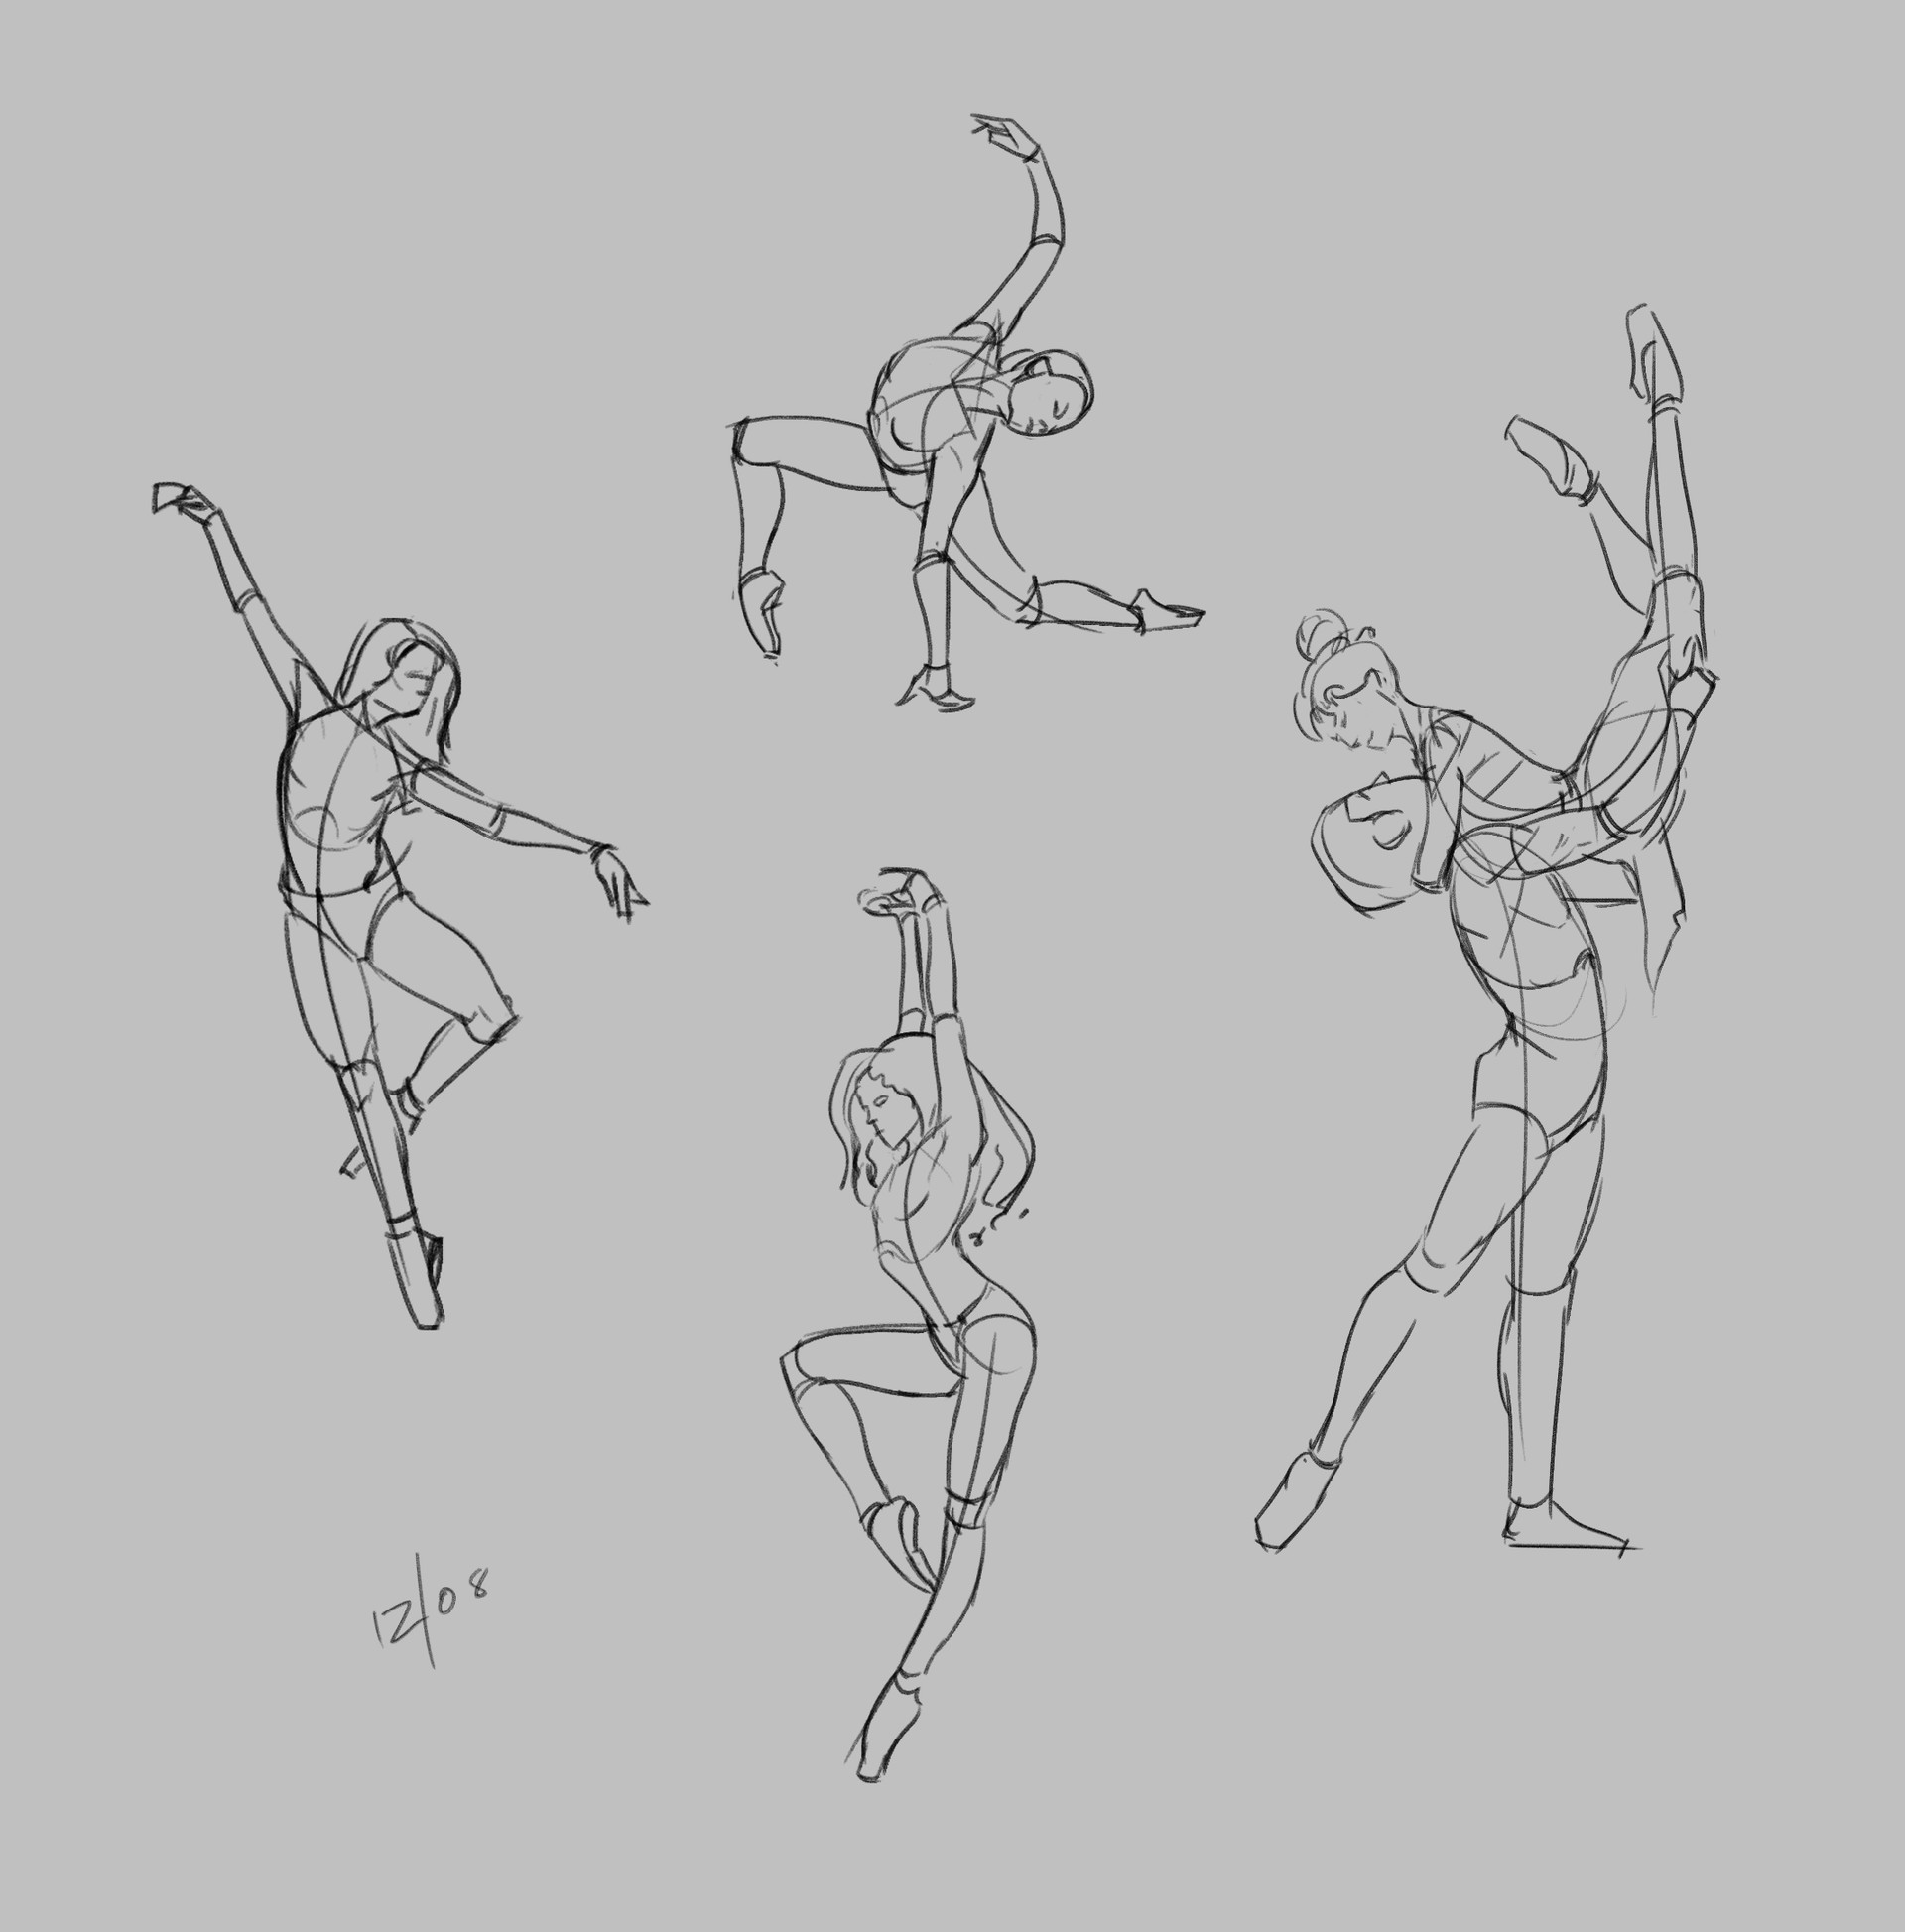 higher ground — Goofy dancing poses for you sims who love to...